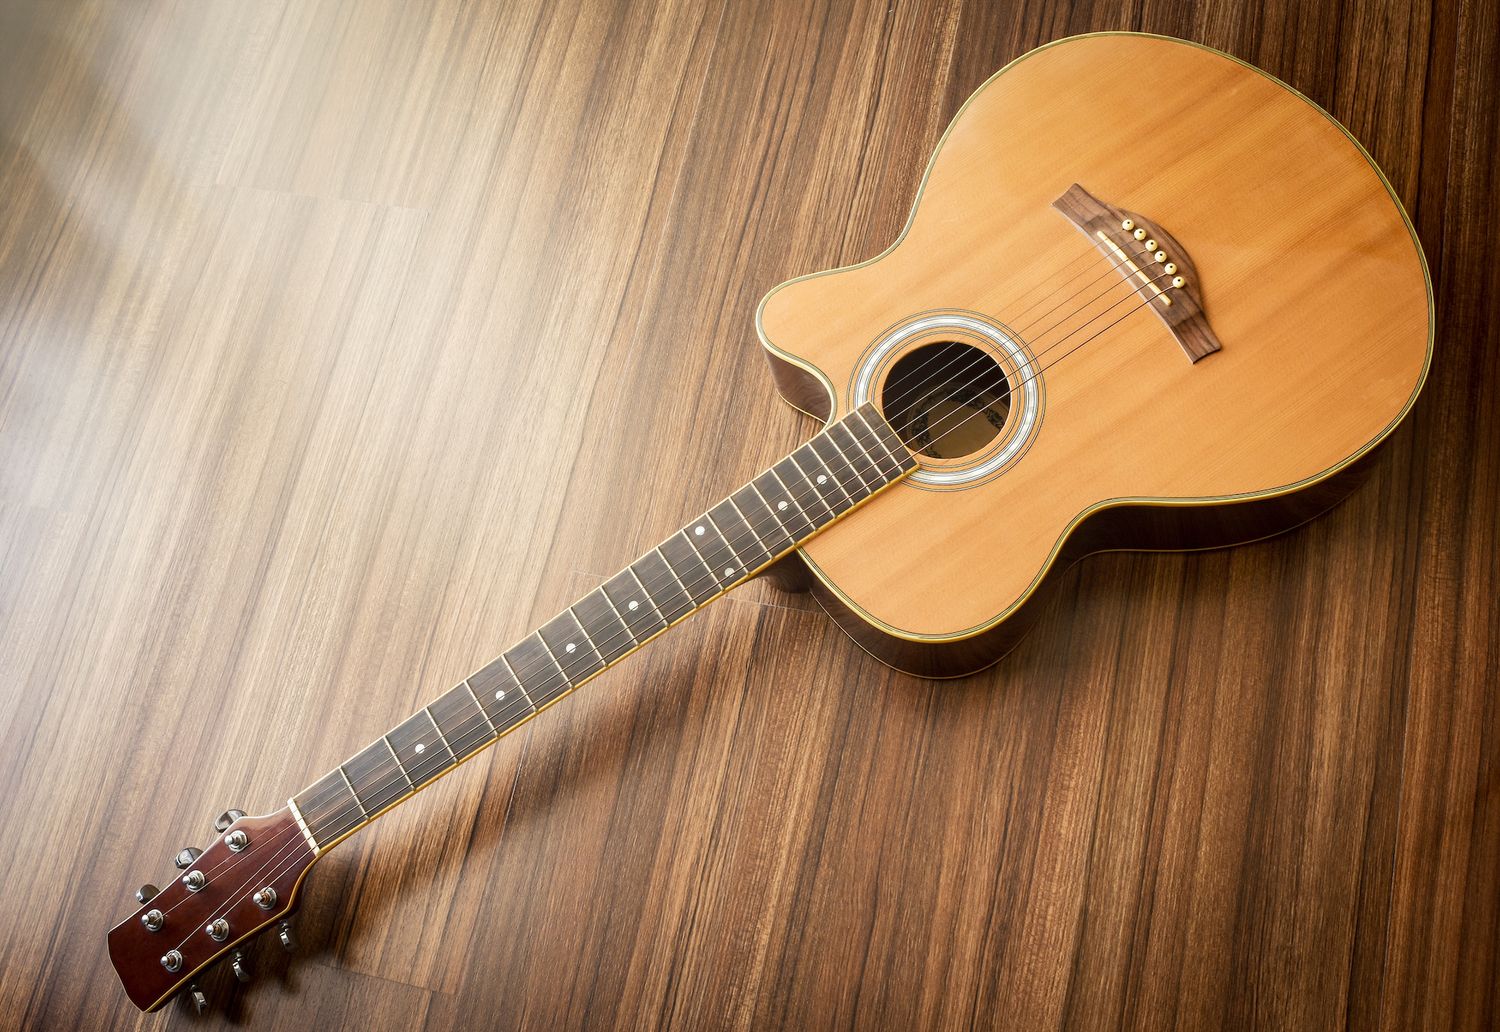 Which Part Of An Acoustic Guitar Has The Most Impact On The Sound